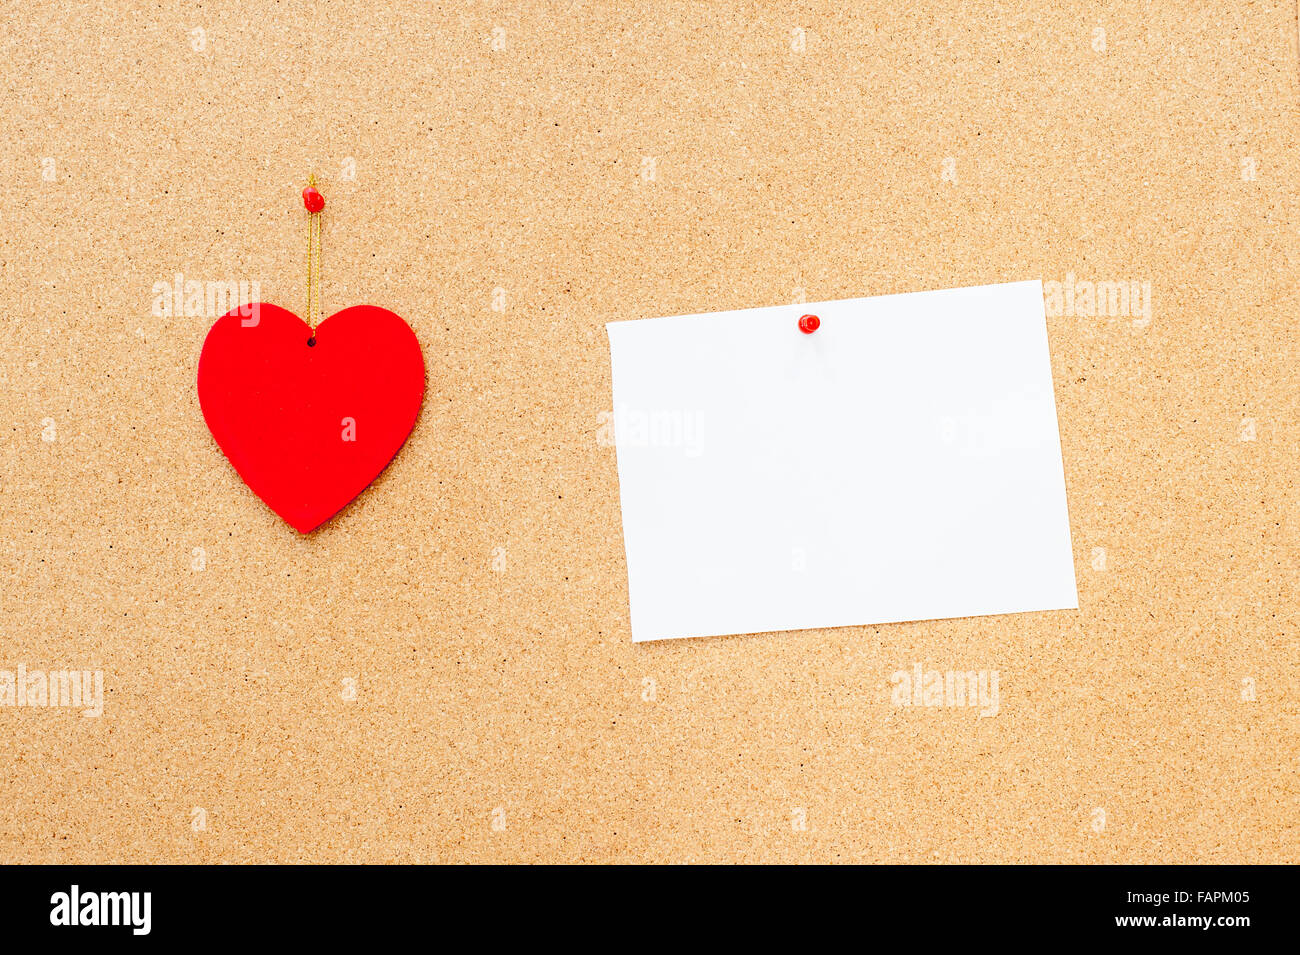 Valentine's day red heart and white empty card pinned on wooden cork board Stock Photo